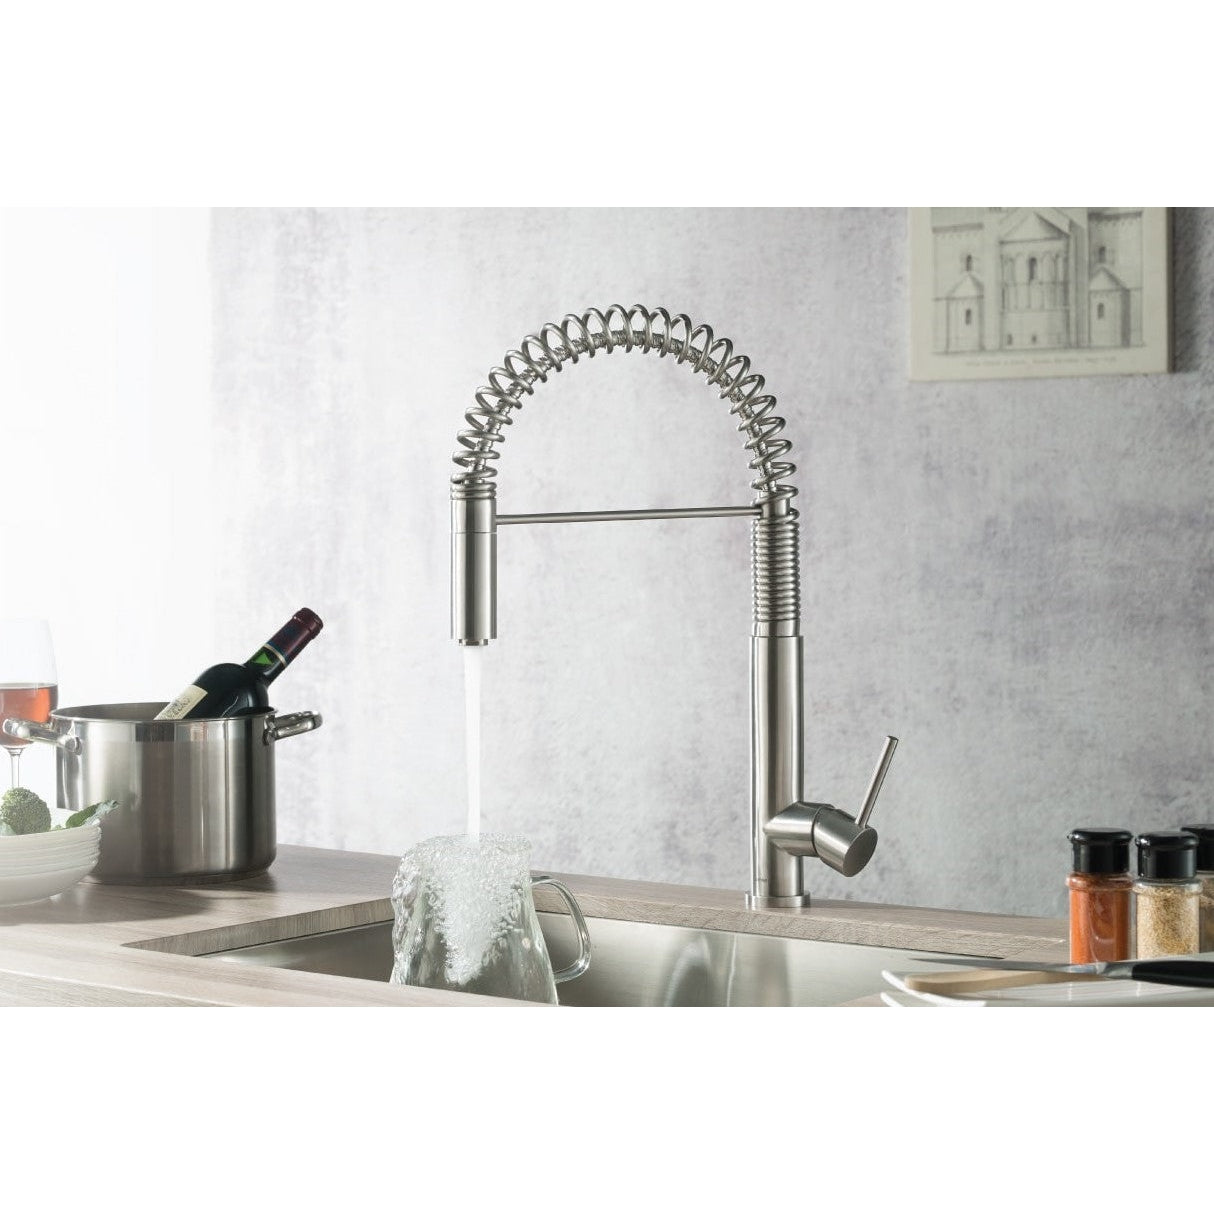 Isenberg Klassiker Dixie 20" Matte Black Semi-Professional Stainless Steel Pull-Down Kitchen Faucet With Dual Function Sprayer